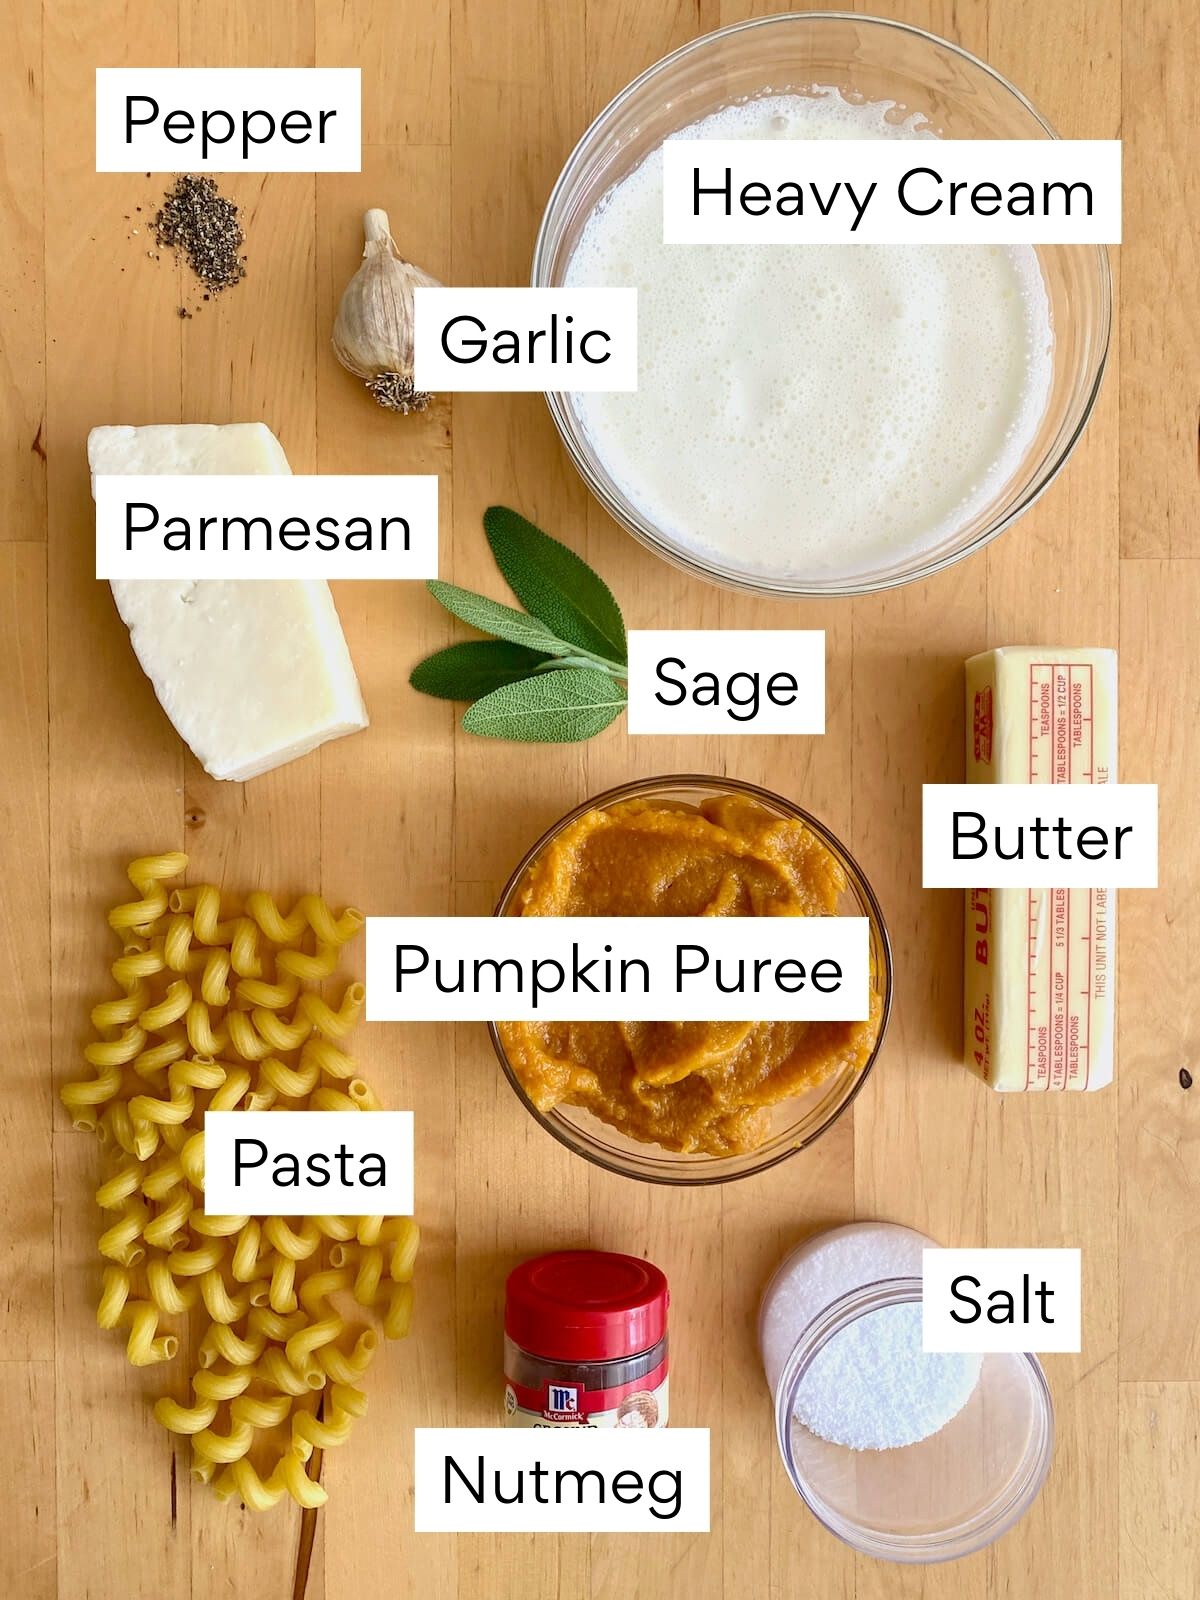 The ingredients to make pumpkin pasta sauce. Each ingredient is labeled with text. They include pepper, garlic, heavy cream, parmesan, sage, butter, pumpkin puree, pasta, nutmeg, and salt.